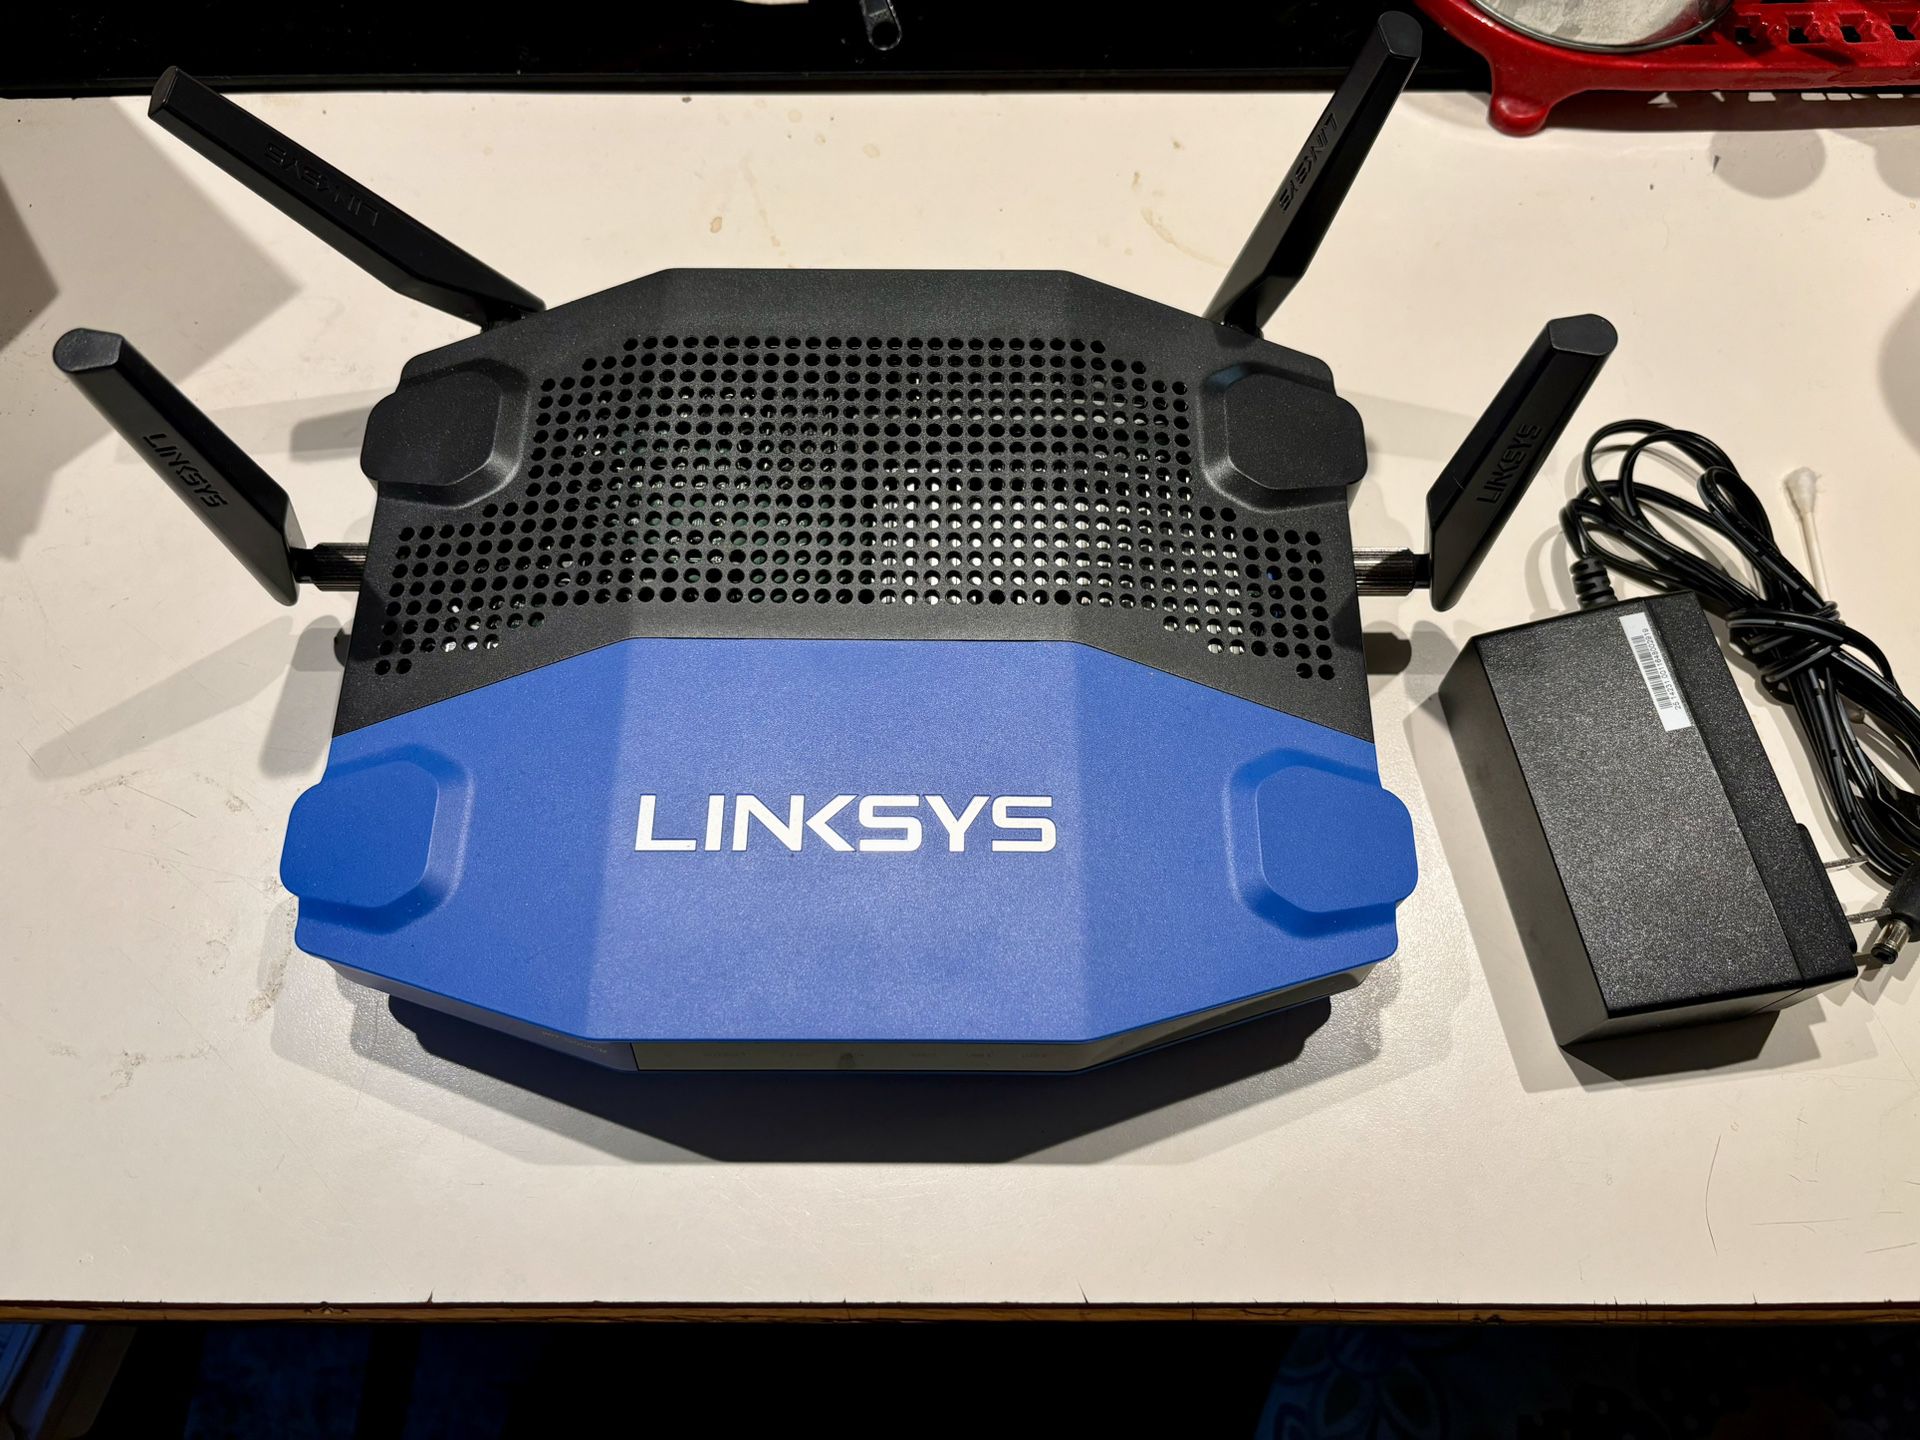 Linksys WRT AC3200 Open Source MU-MIMO Dual Band Gaming Router